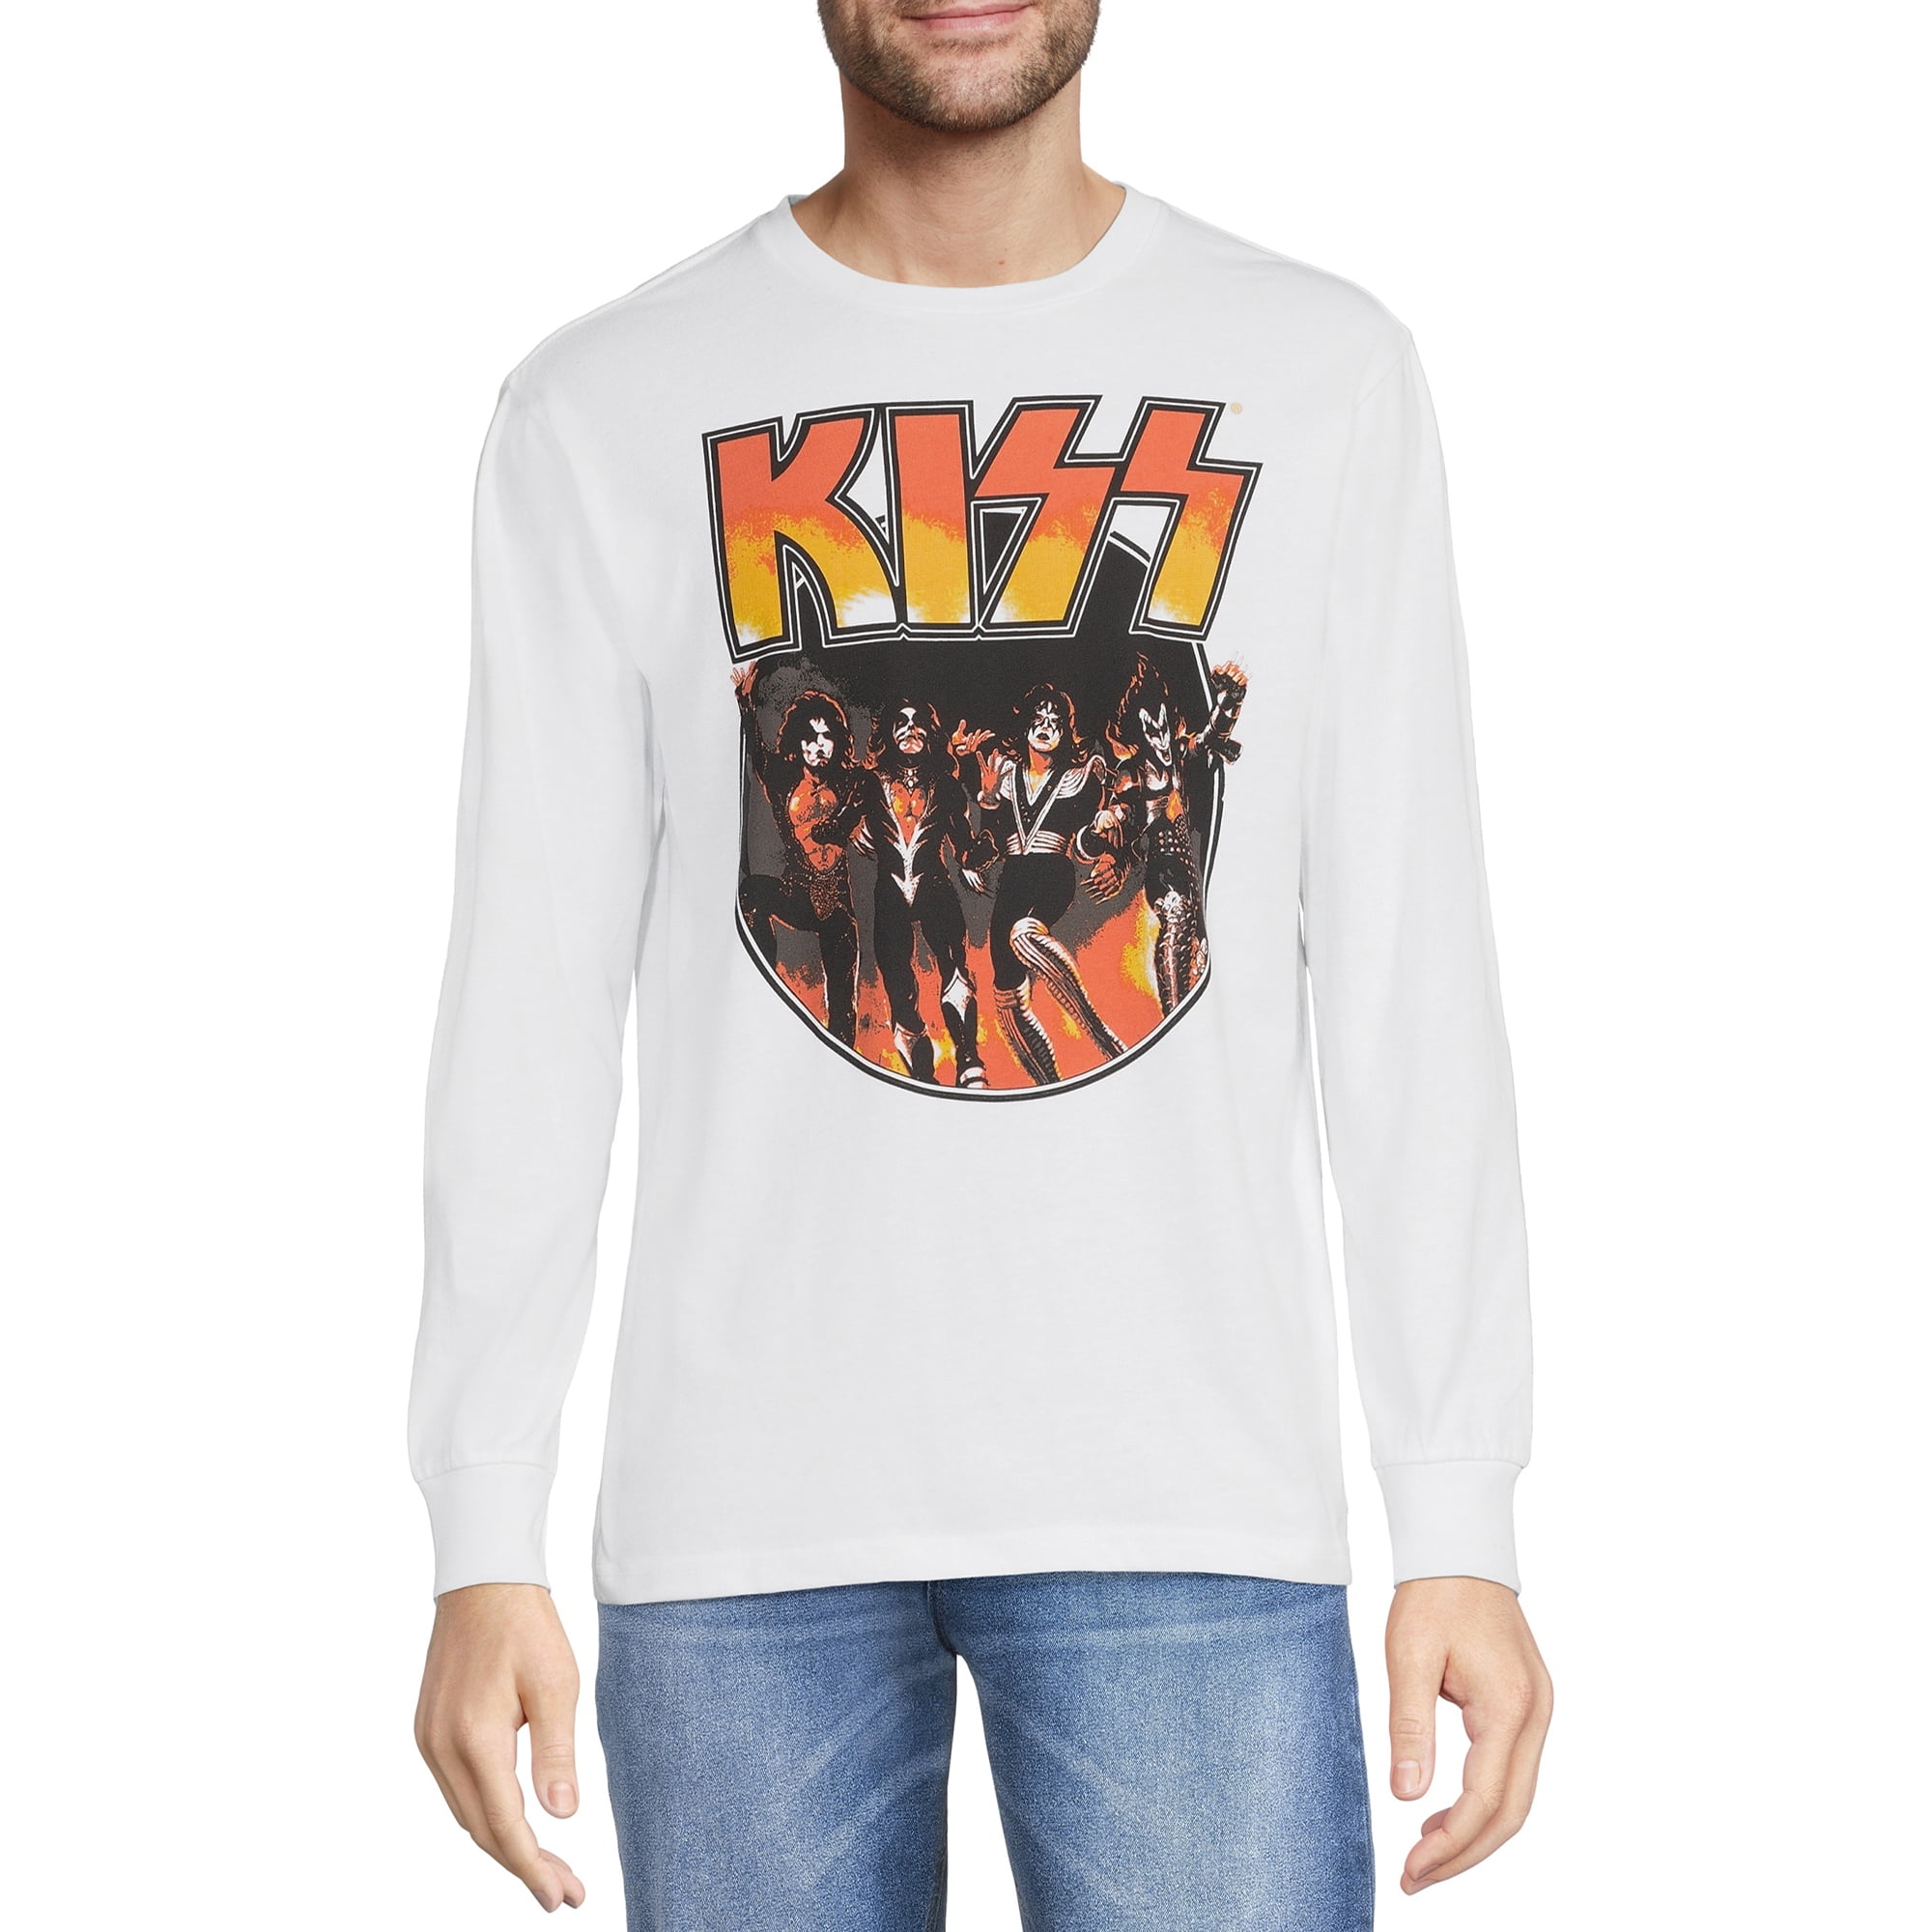 Kiss Men's with Long Sleeves, Sizes S-3X Walmart.com